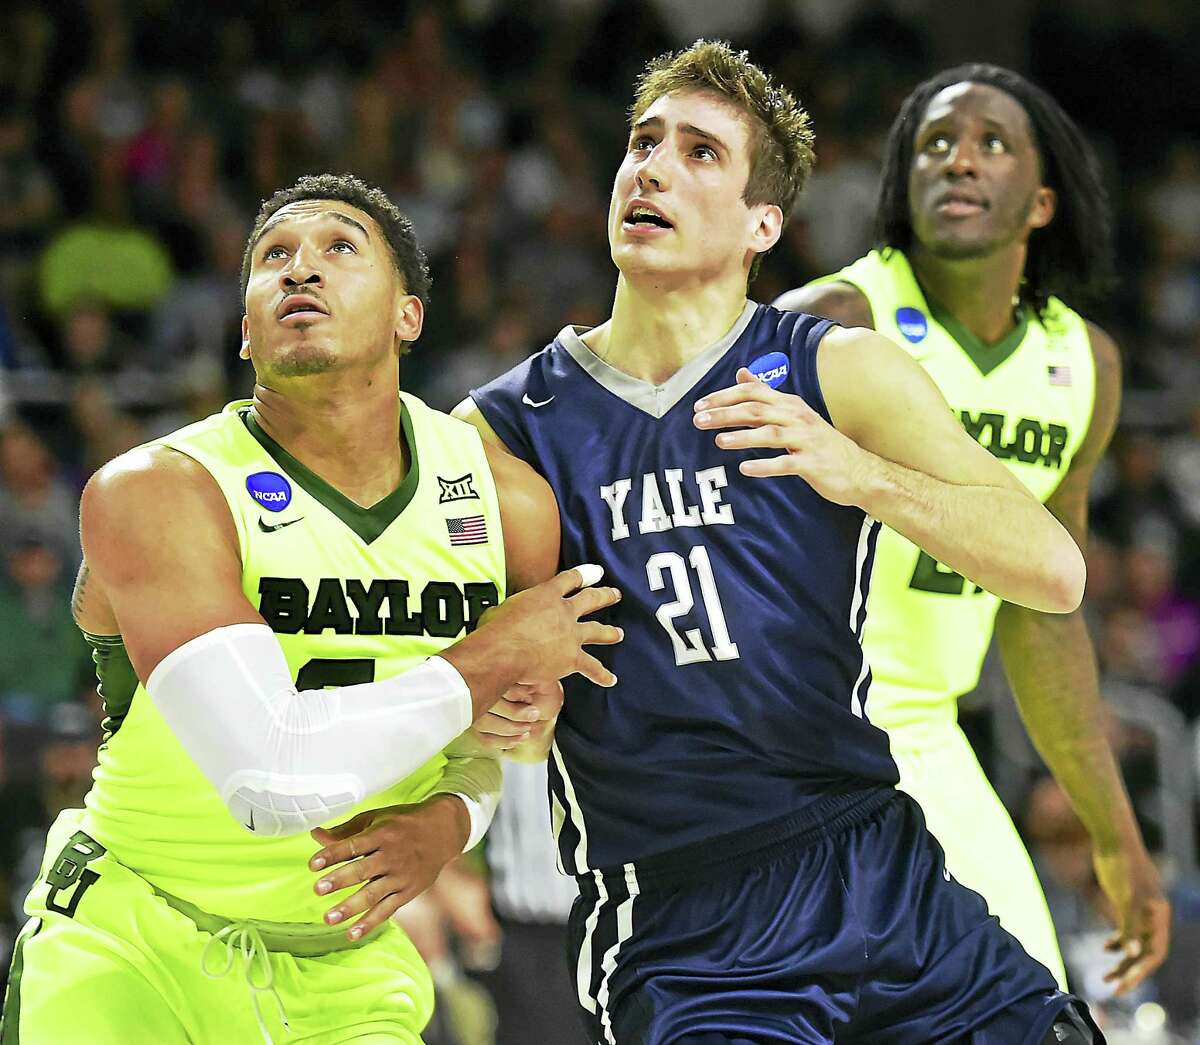 Yale’s Nick Victor has provide a bit of everything for the Bulldogs this season, including rebounding and solid defense.